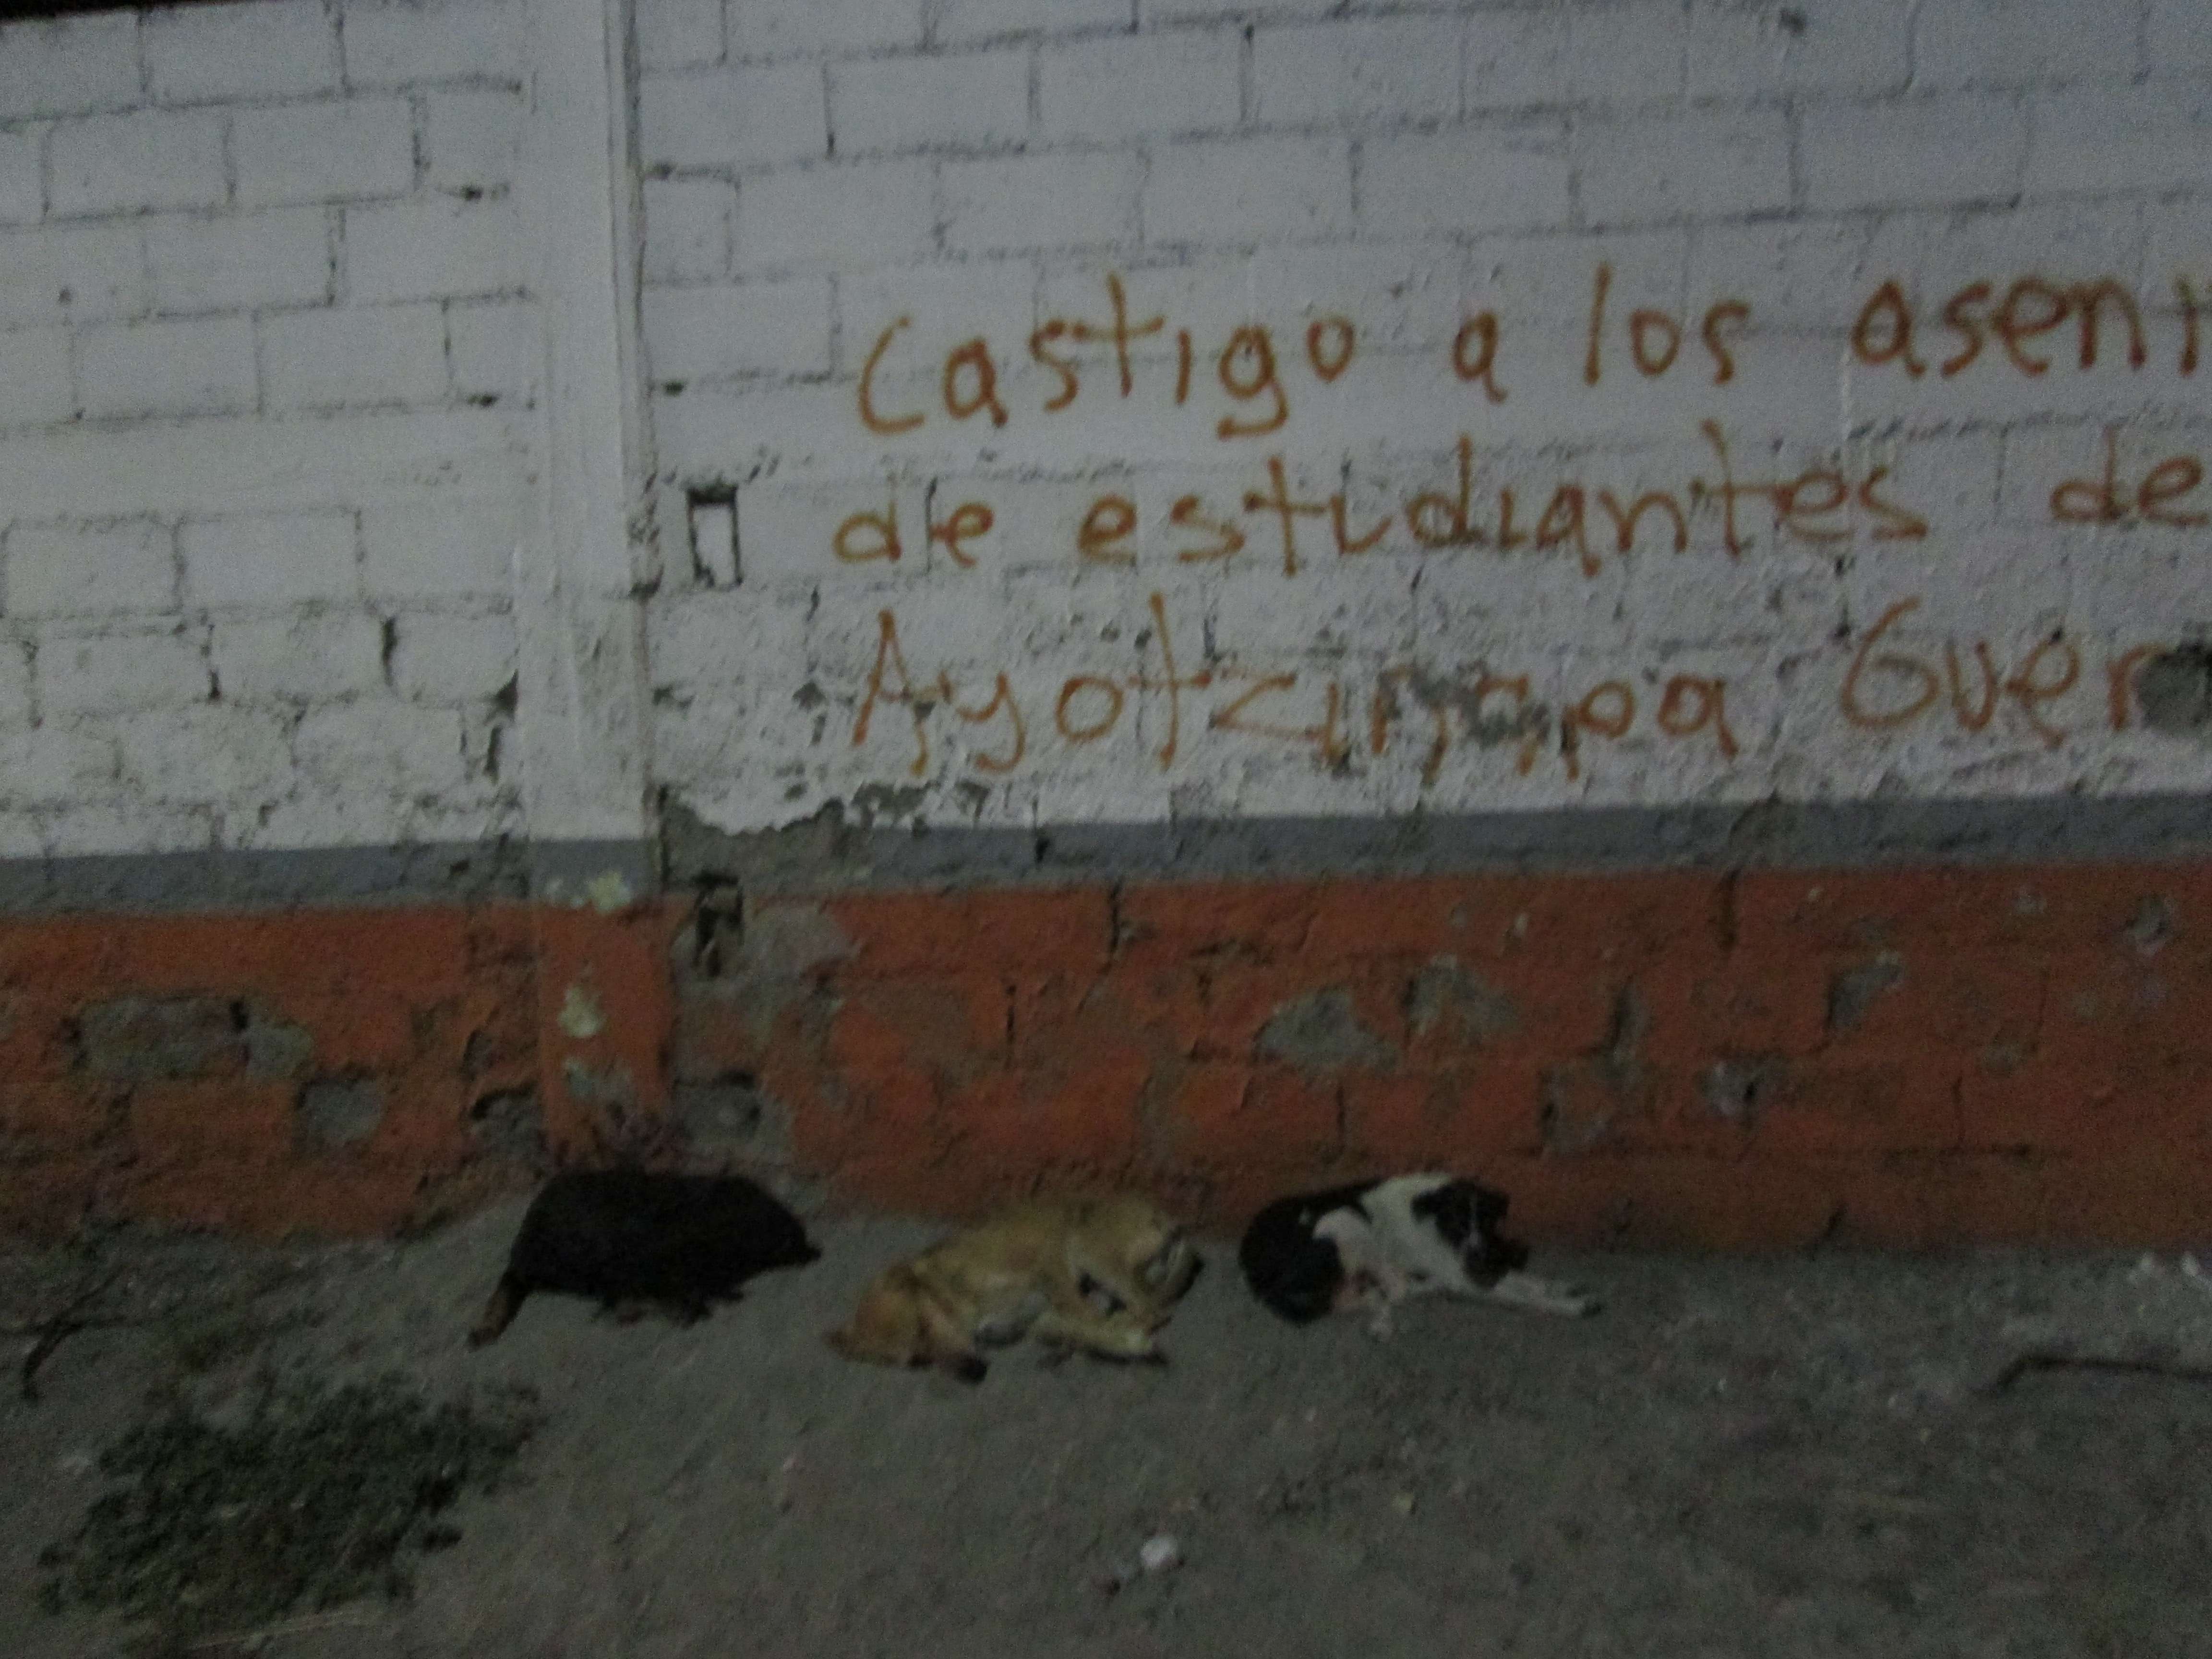 Three stray dogs I saw on the way to the internet cafe, sleeping in front of graffiti which reads 'Castigo a los asen... de estudiantes de... Ayotzinqpa Guer...'